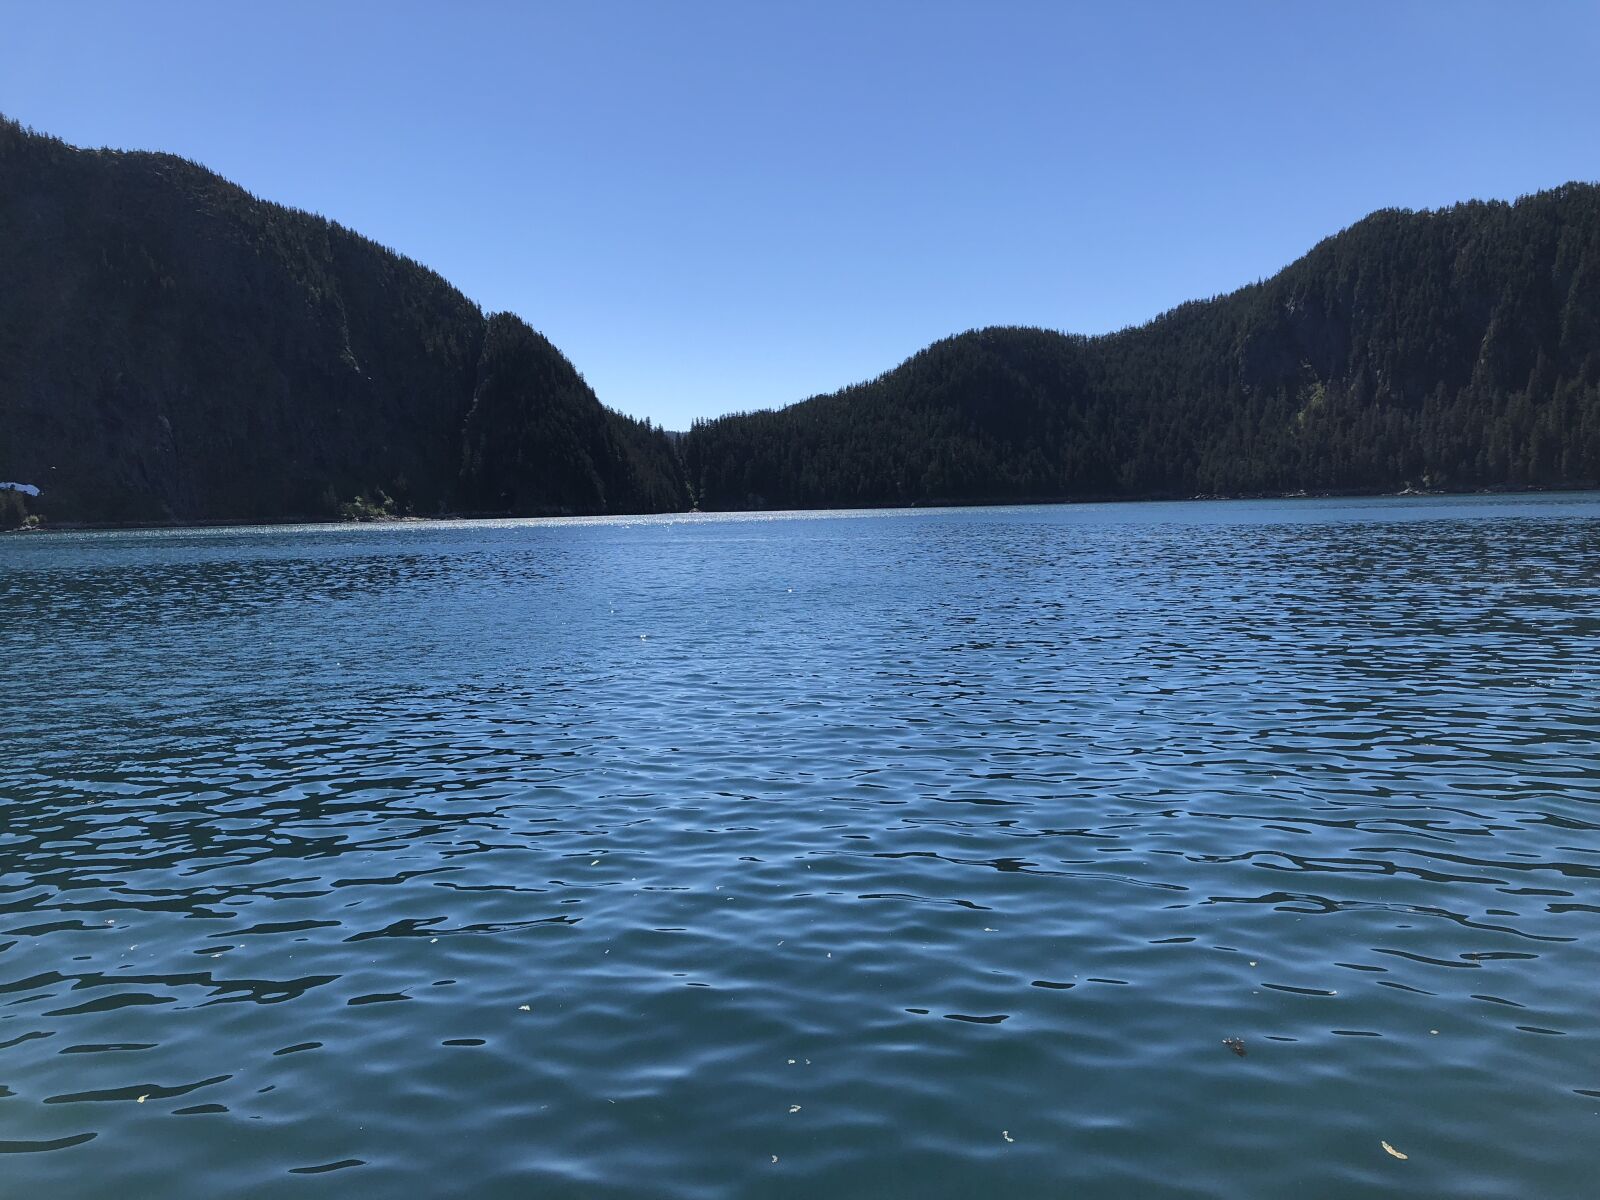 Apple iPhone X sample photo. Ocean, water, mountains photography